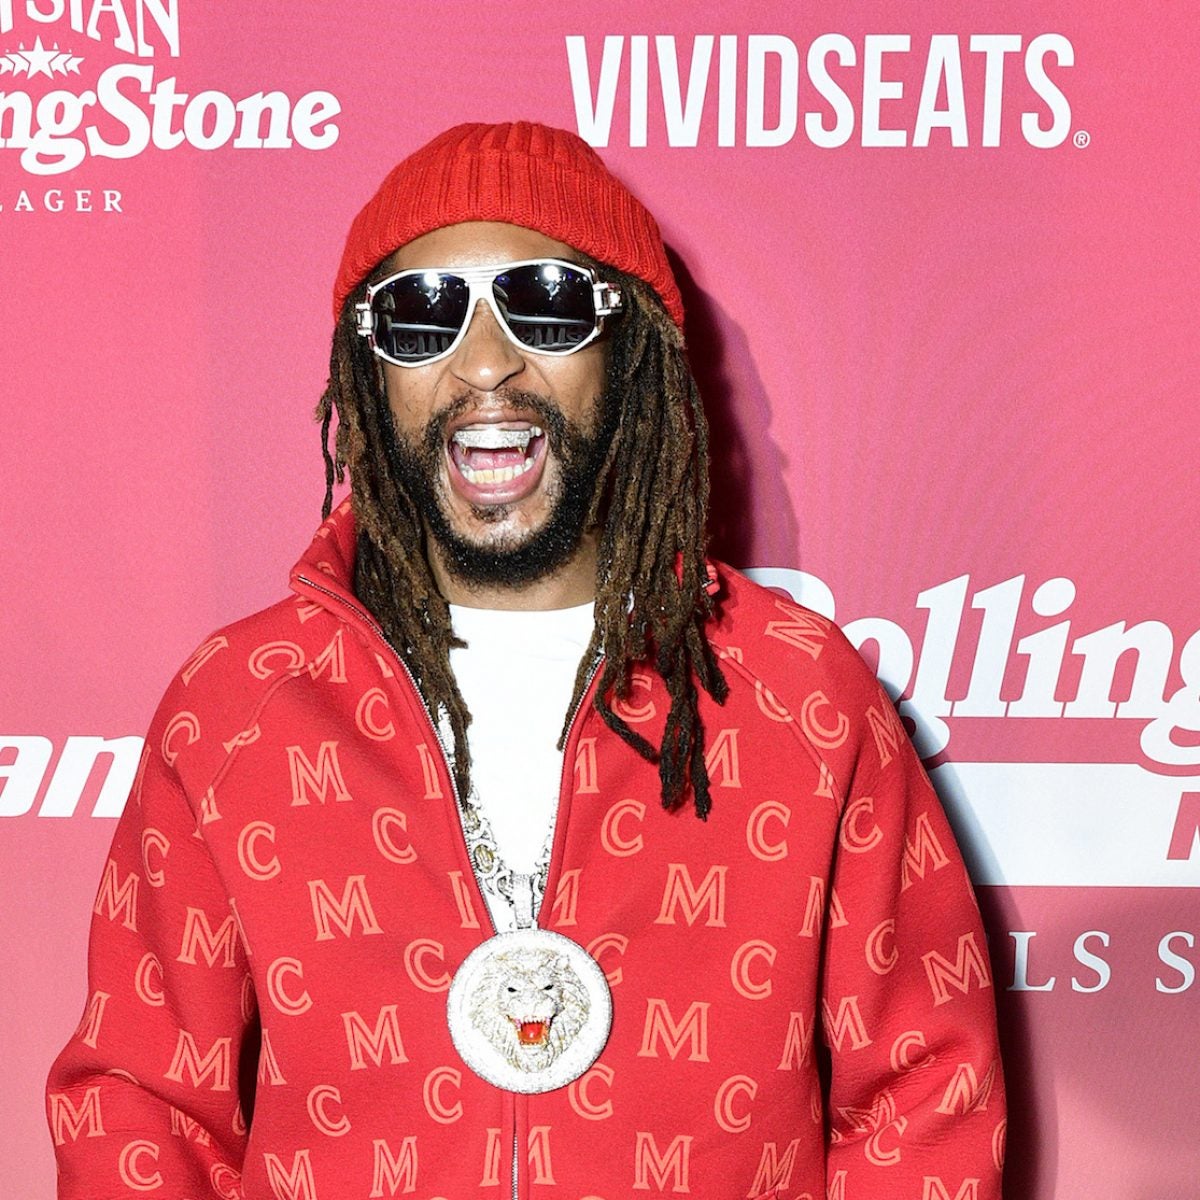 Lil Jon Teases Unreleased Song With Usher And Ludacris